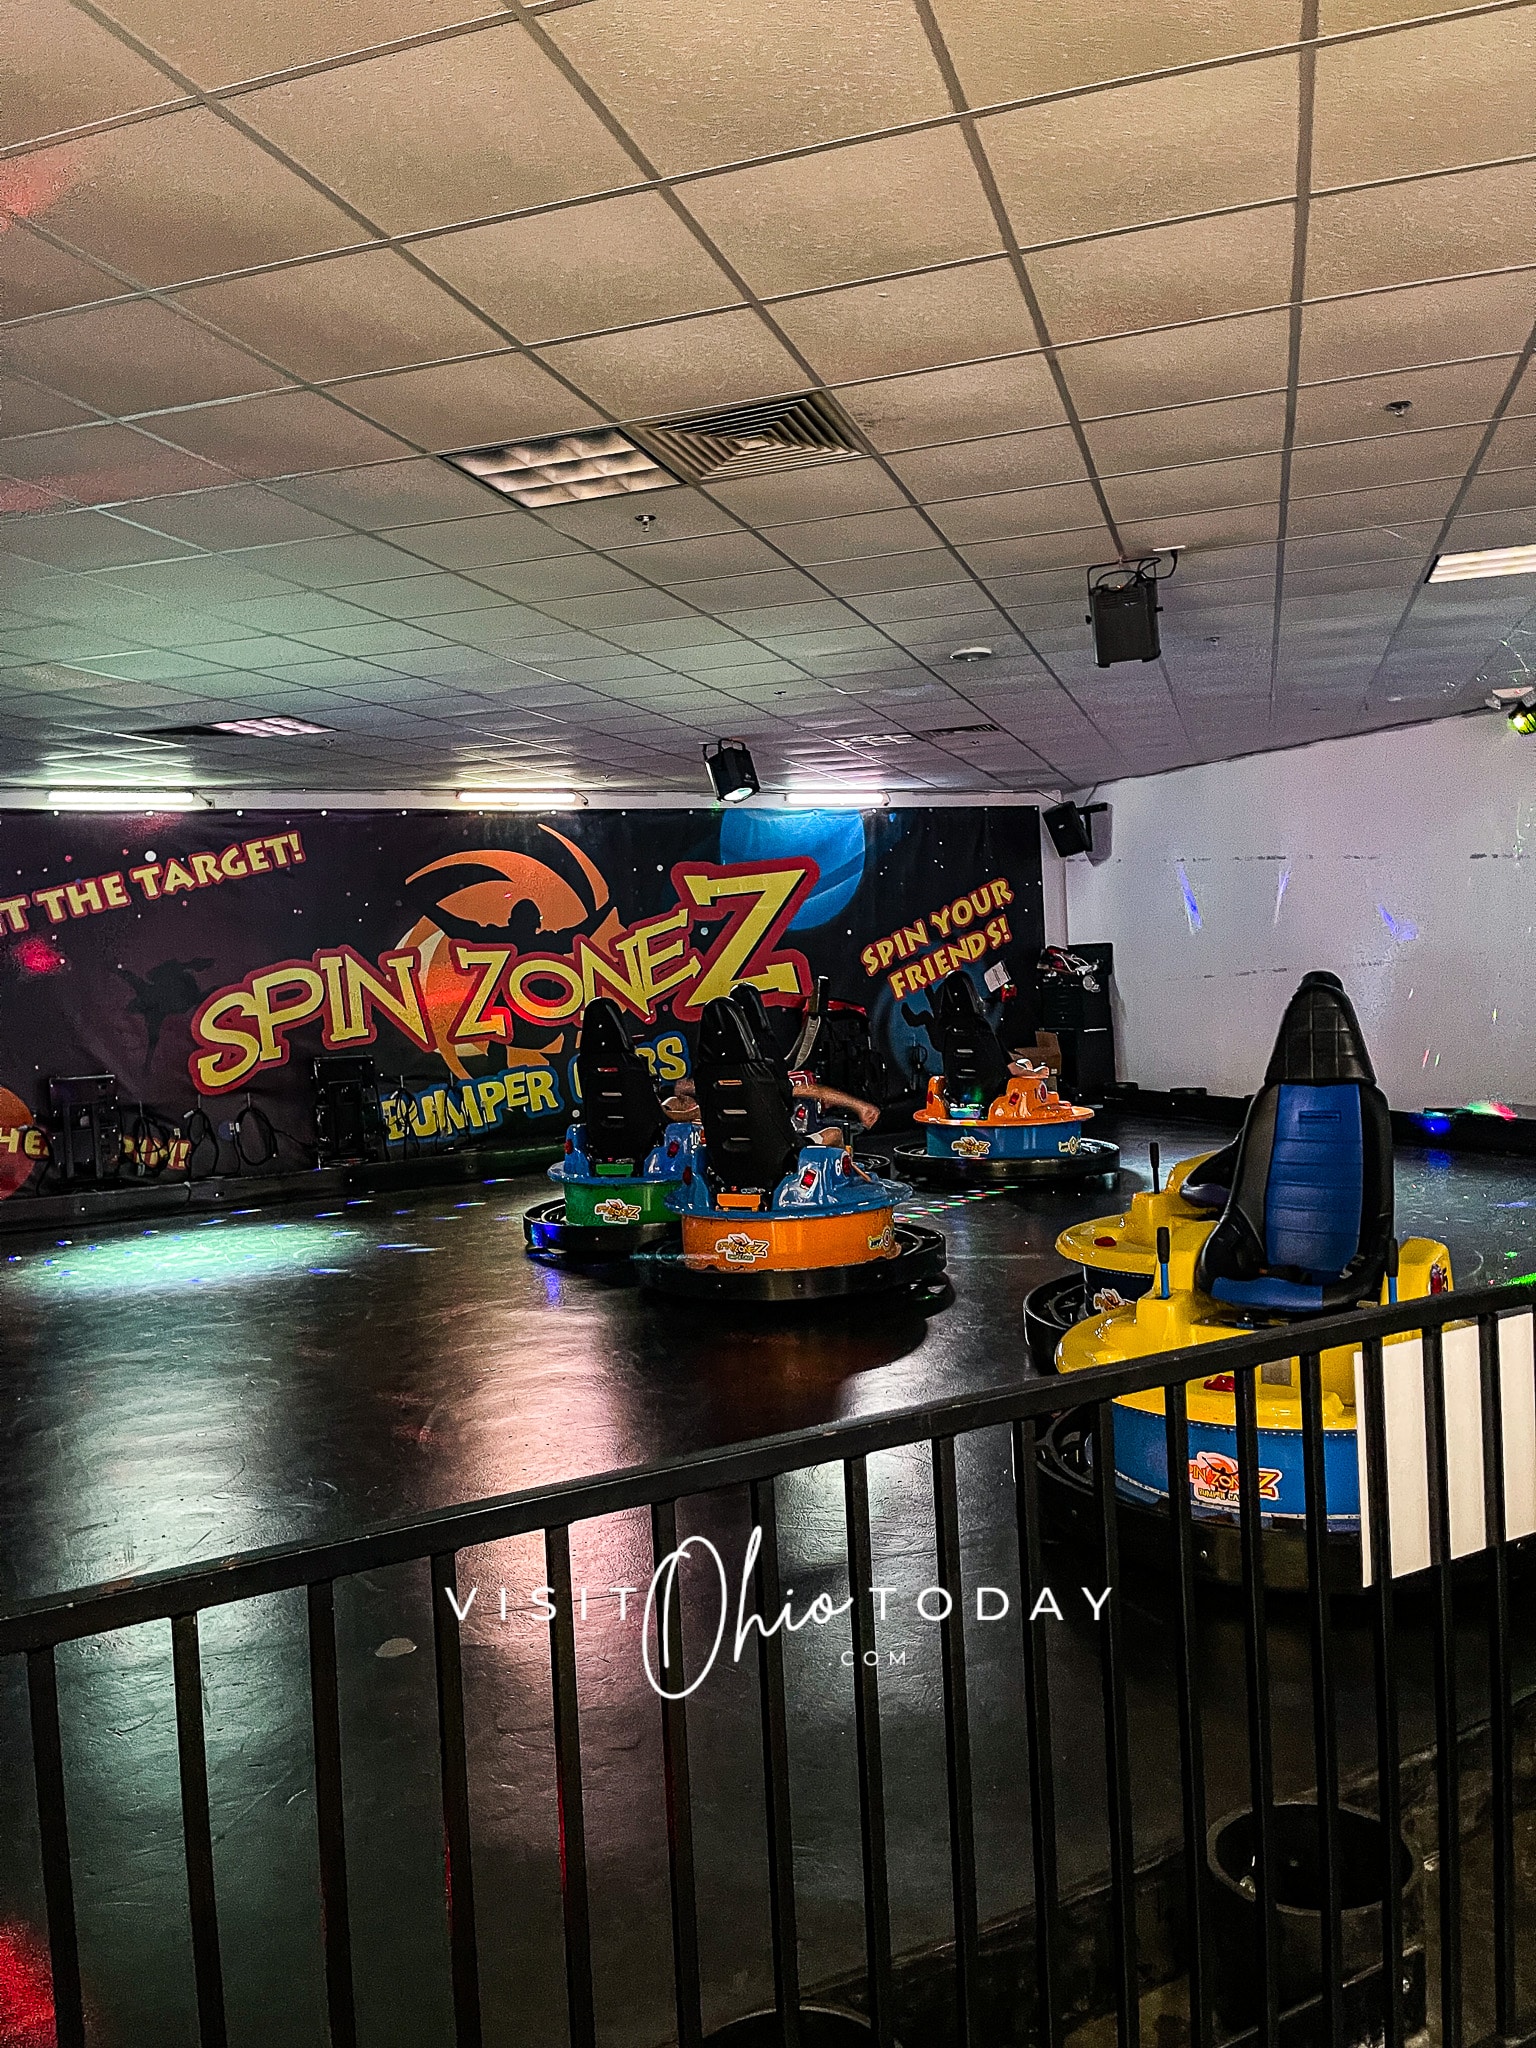 Vertical photo showing the spin zone bumper cars in their arena with 3 occupied cars Photo credit: Cindy Gordon of VisitOhioToday.com